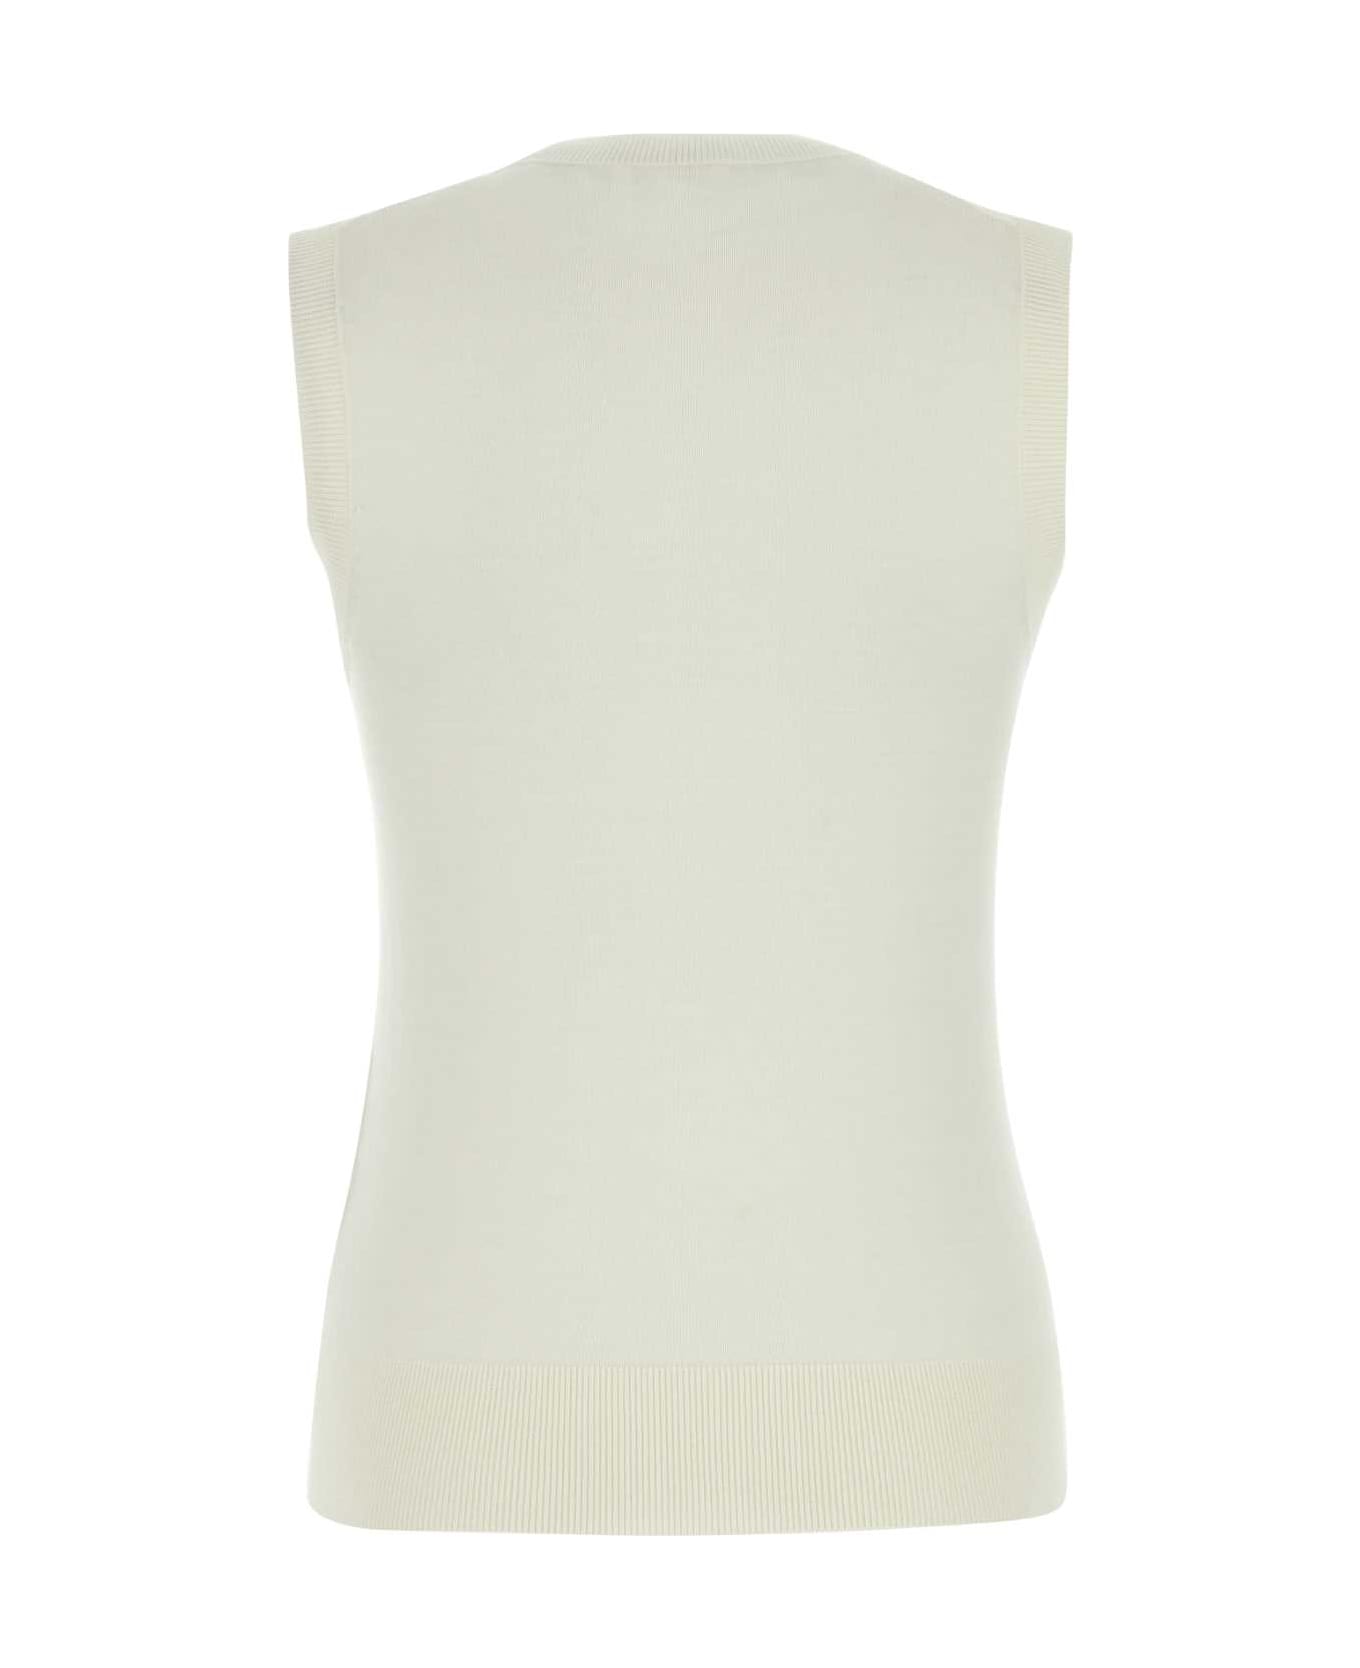 Chloé Knitted Top - ICONICMILK ベスト